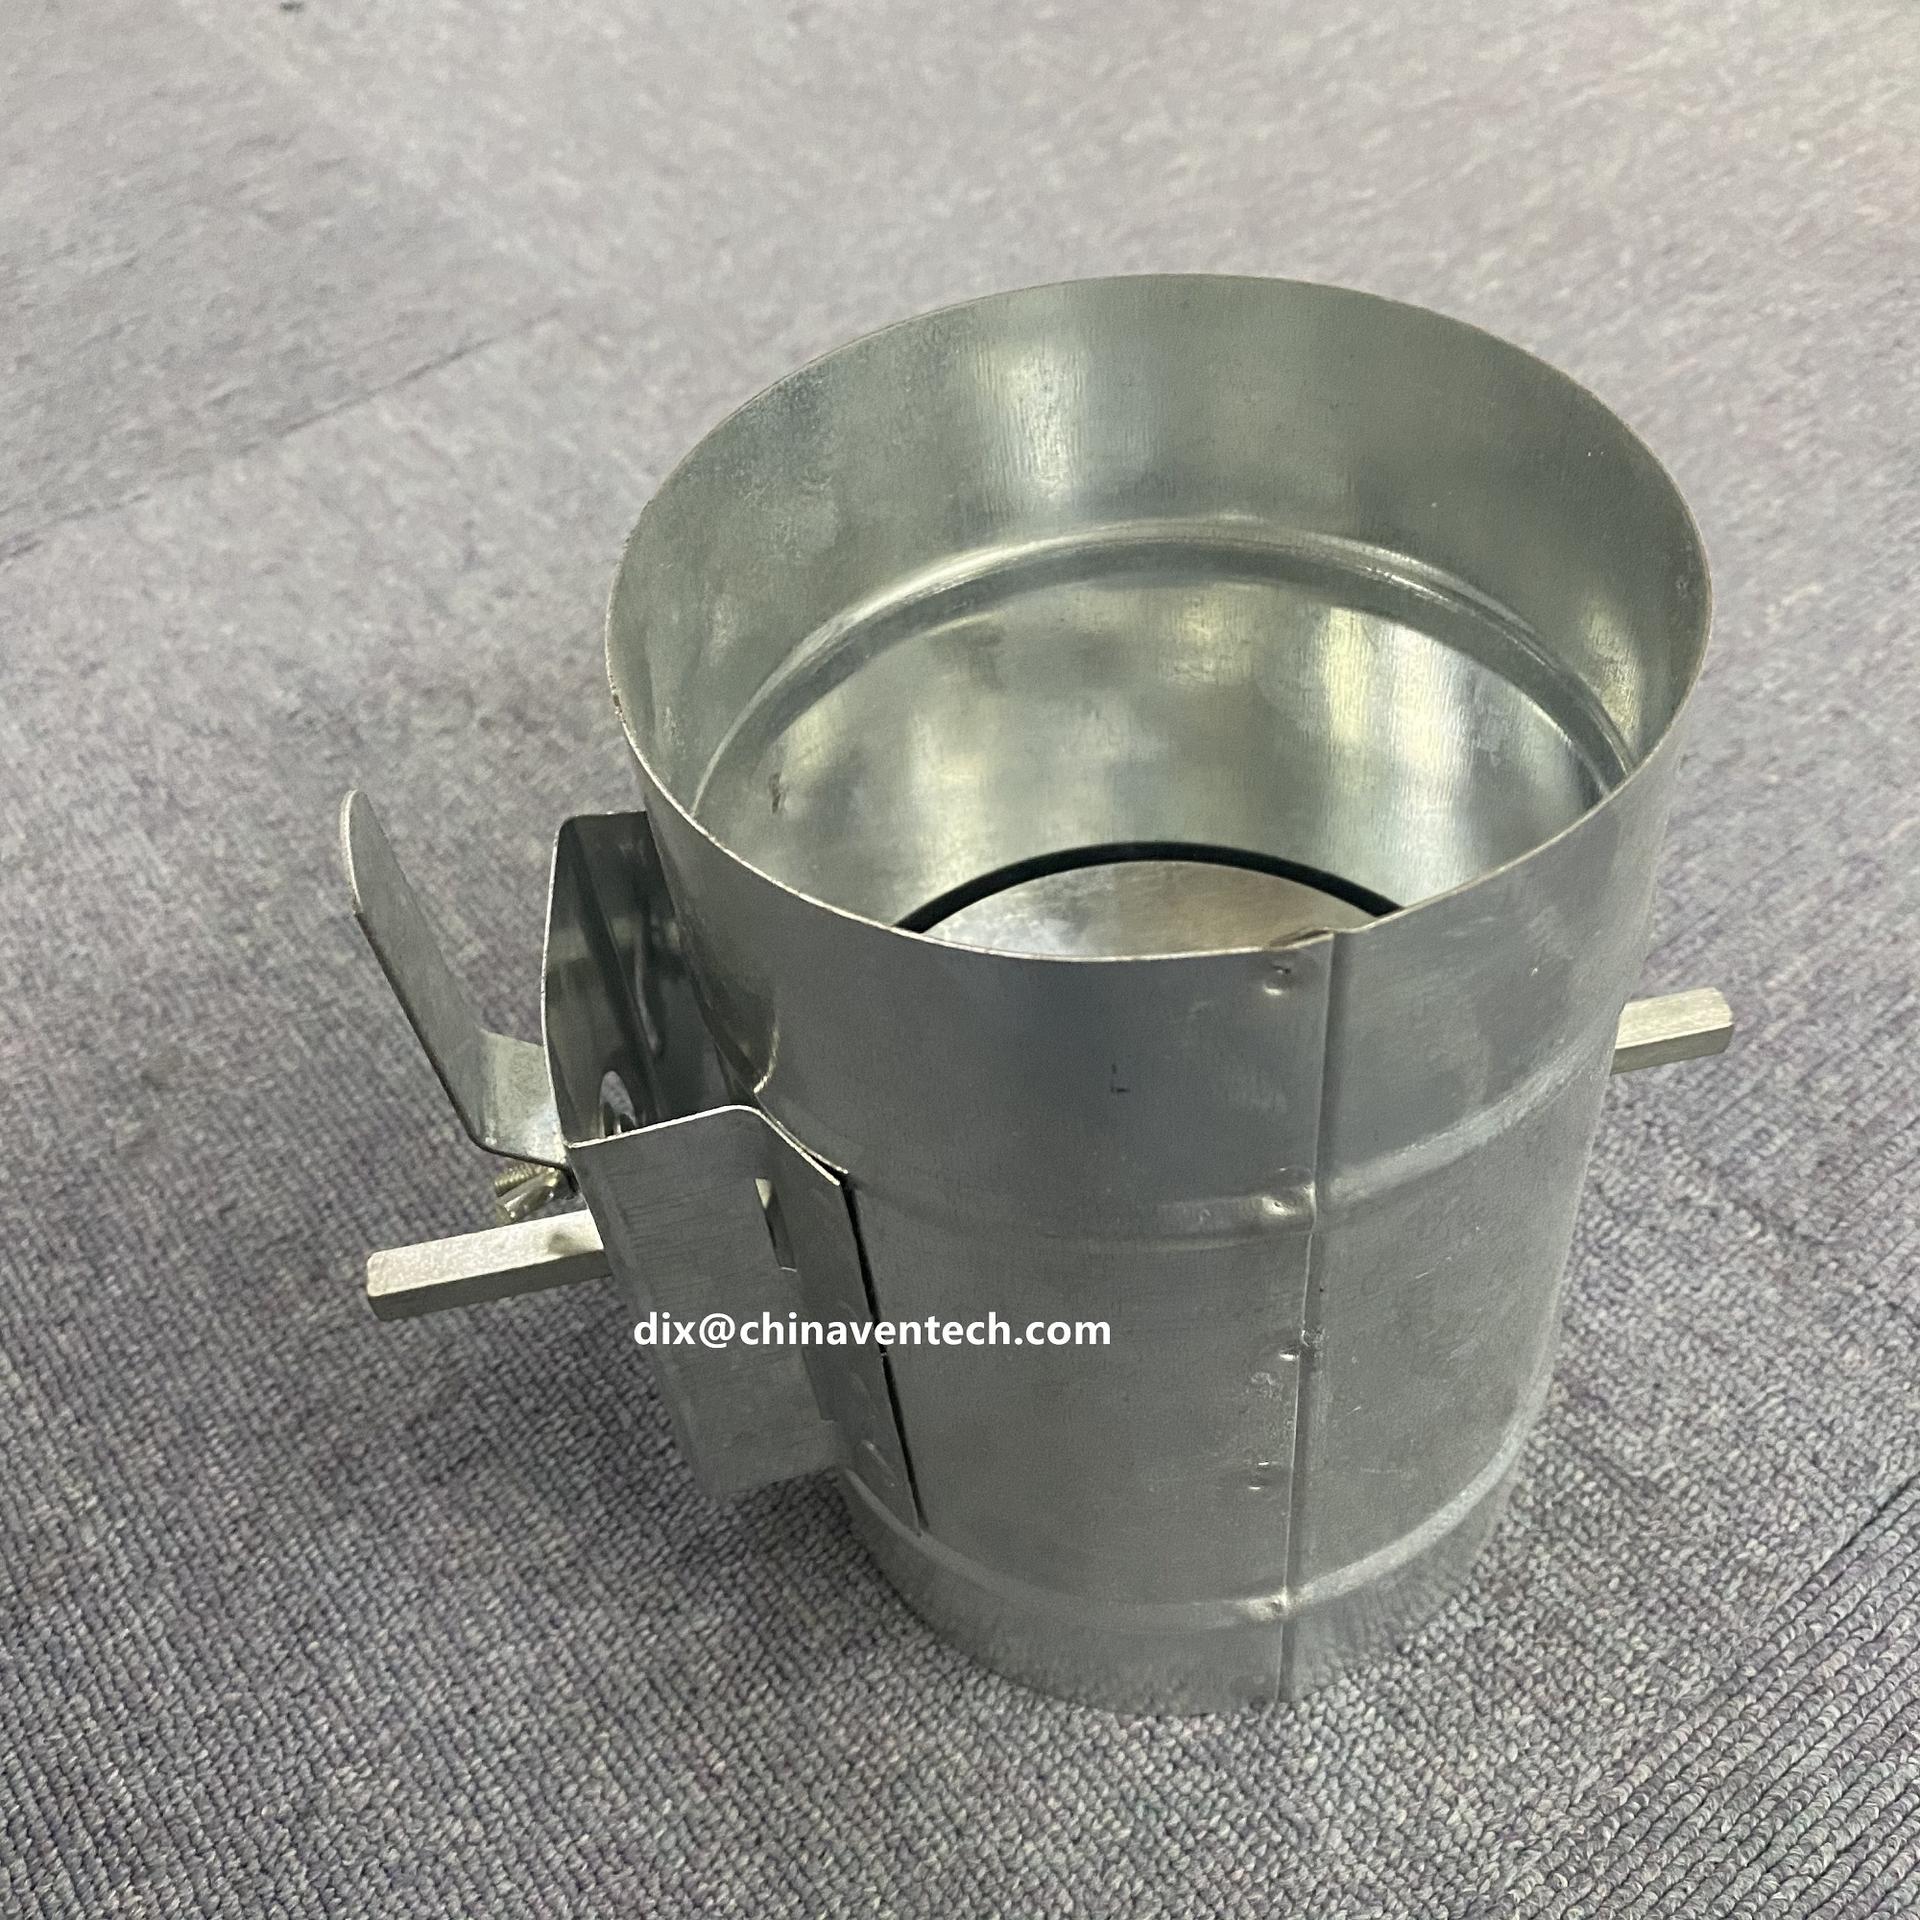 HVAC Systems Adjustable Air Damper Manual Round Air Control Damper For Duct Installation